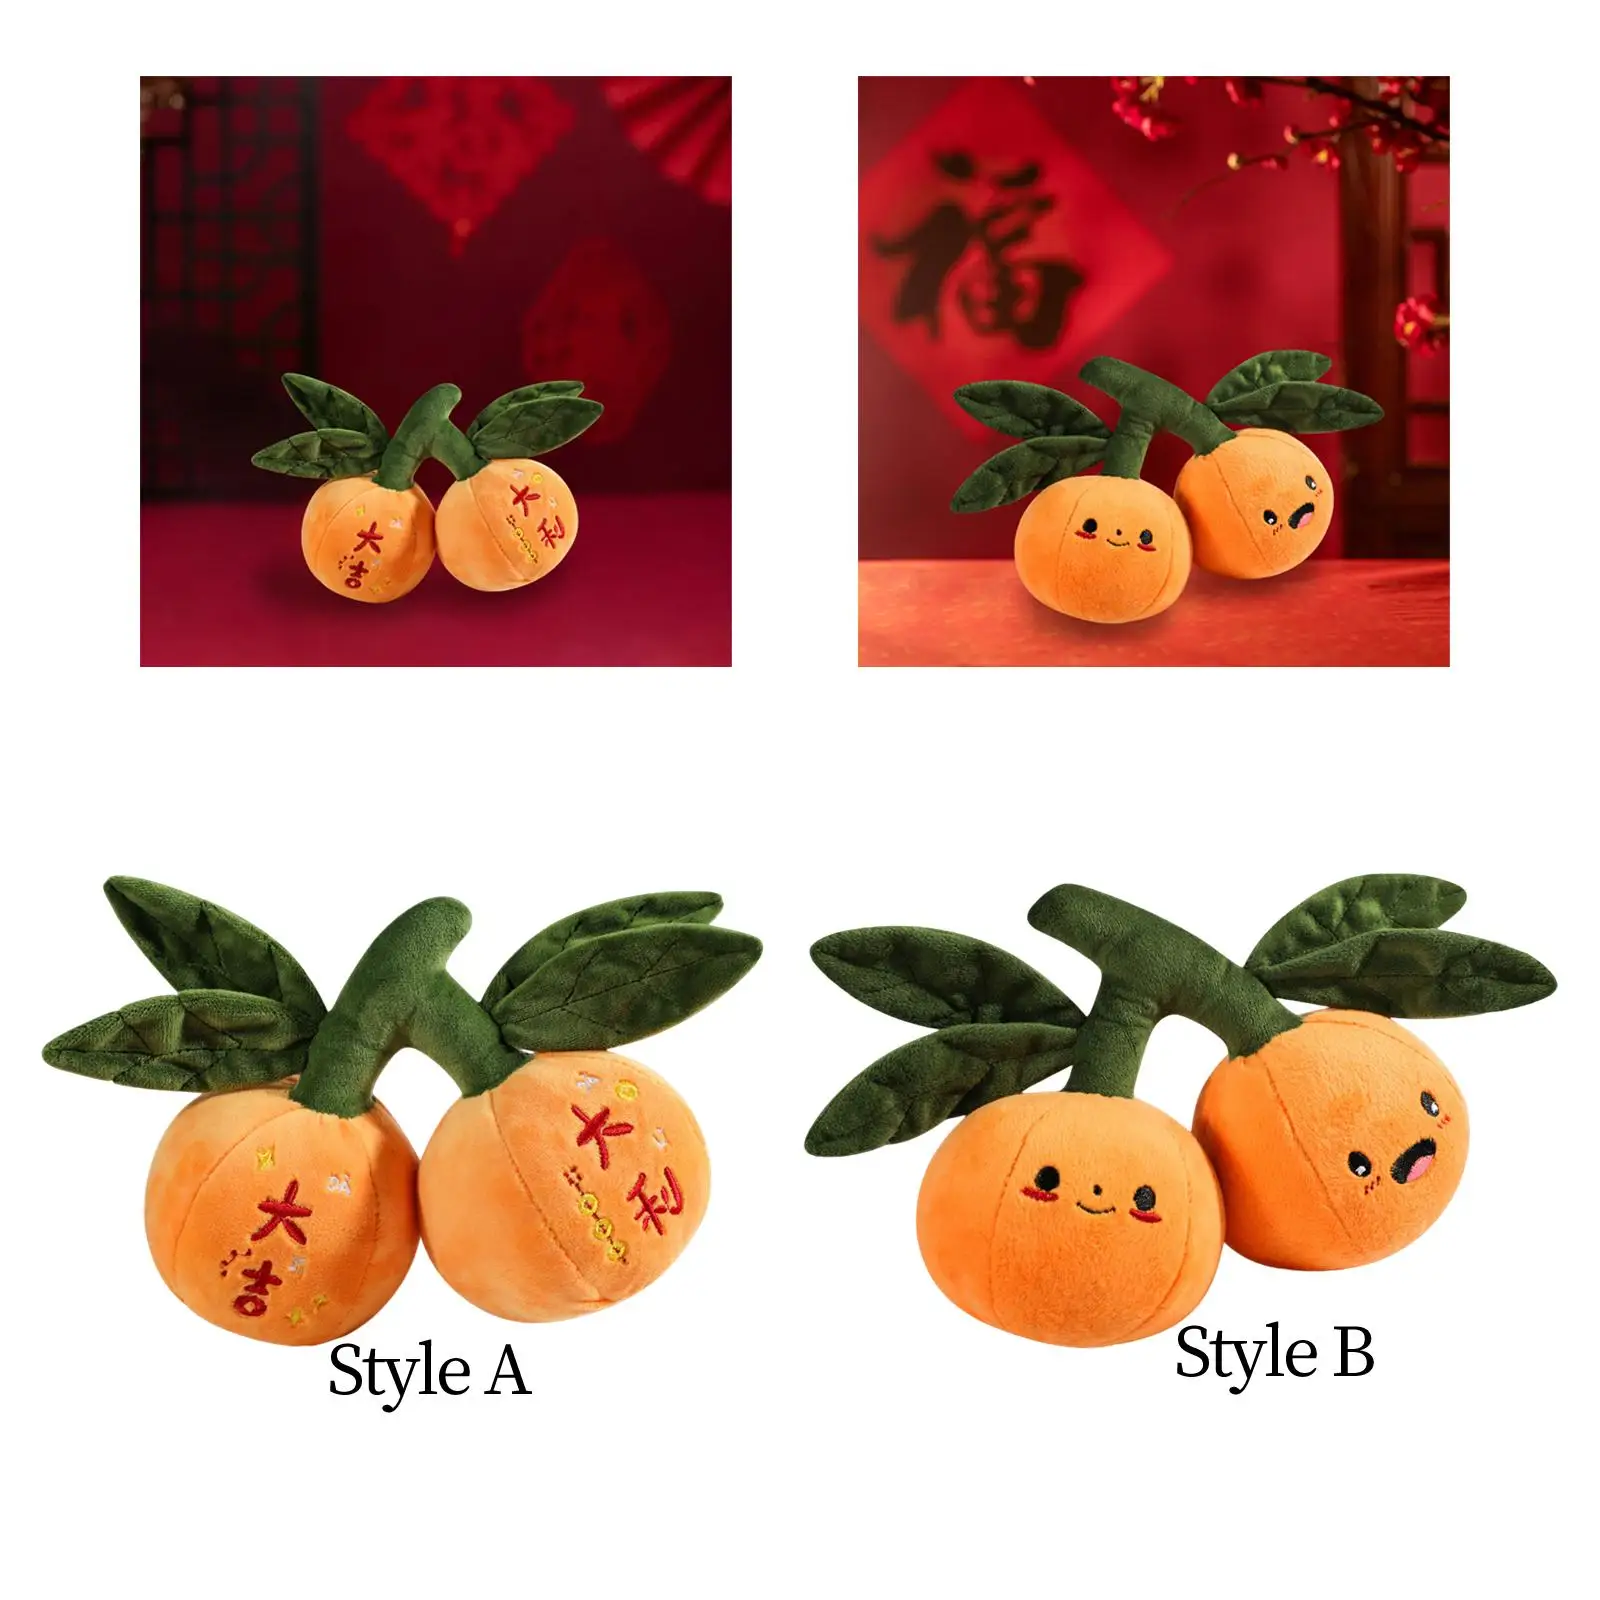 Cute Fruits Simulation Doll Gifts Soft Plush for Home Bedroom Decoration